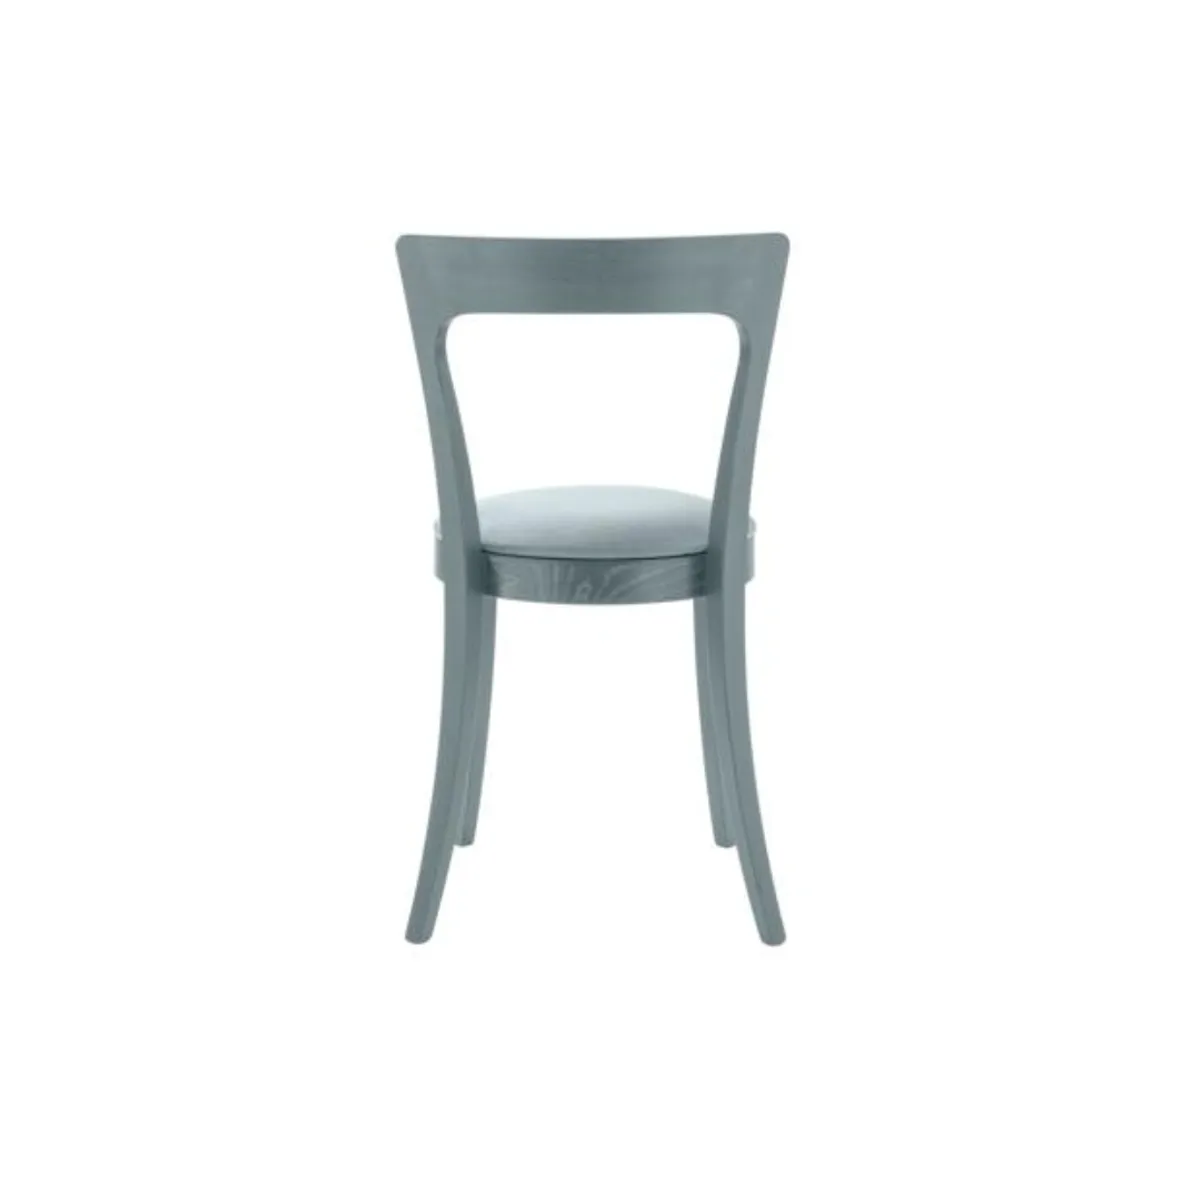 Elodie soft side chair 4